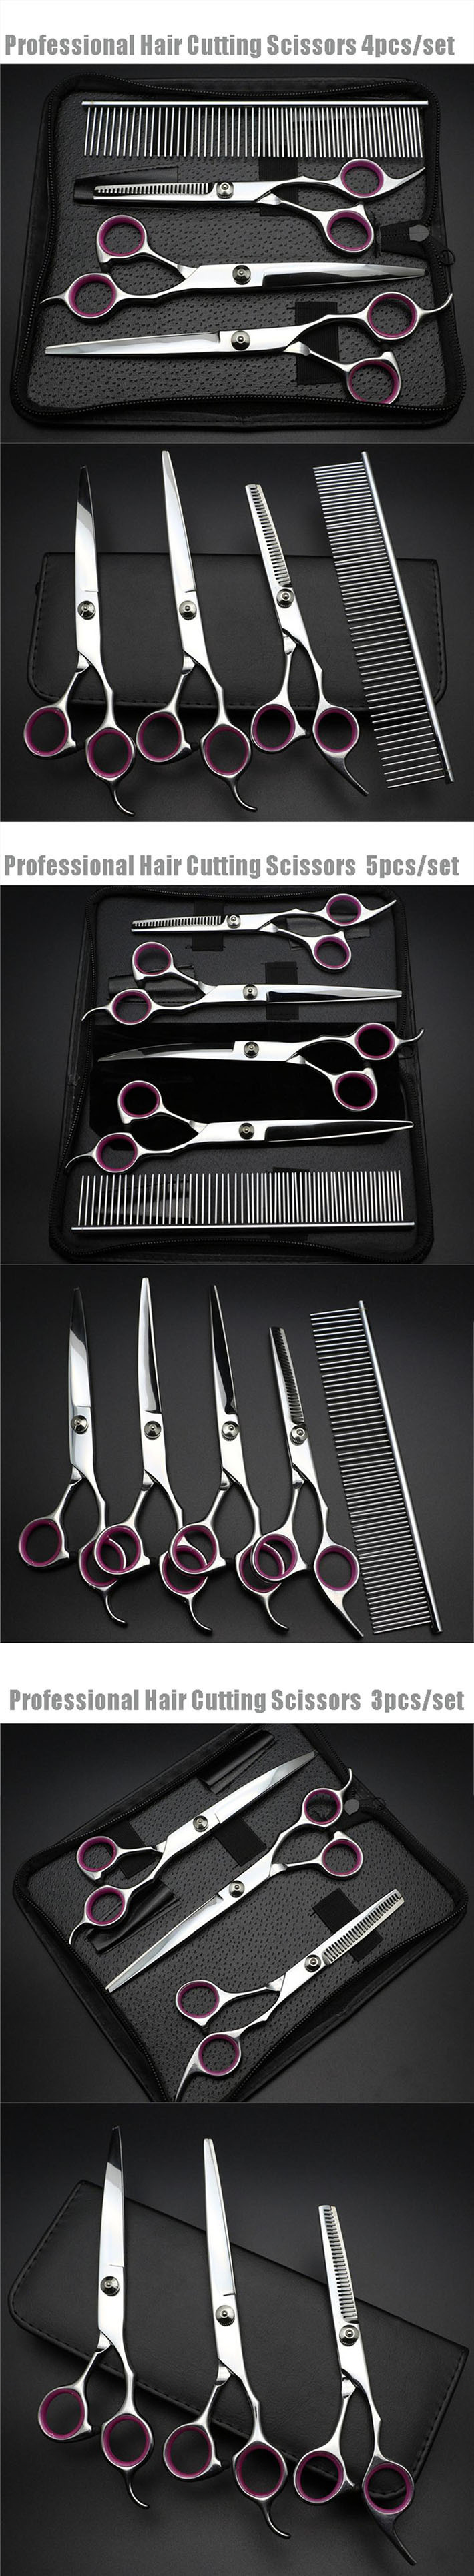 High Quality Professional Salon Stainless Steel Hair Cutting Scissors